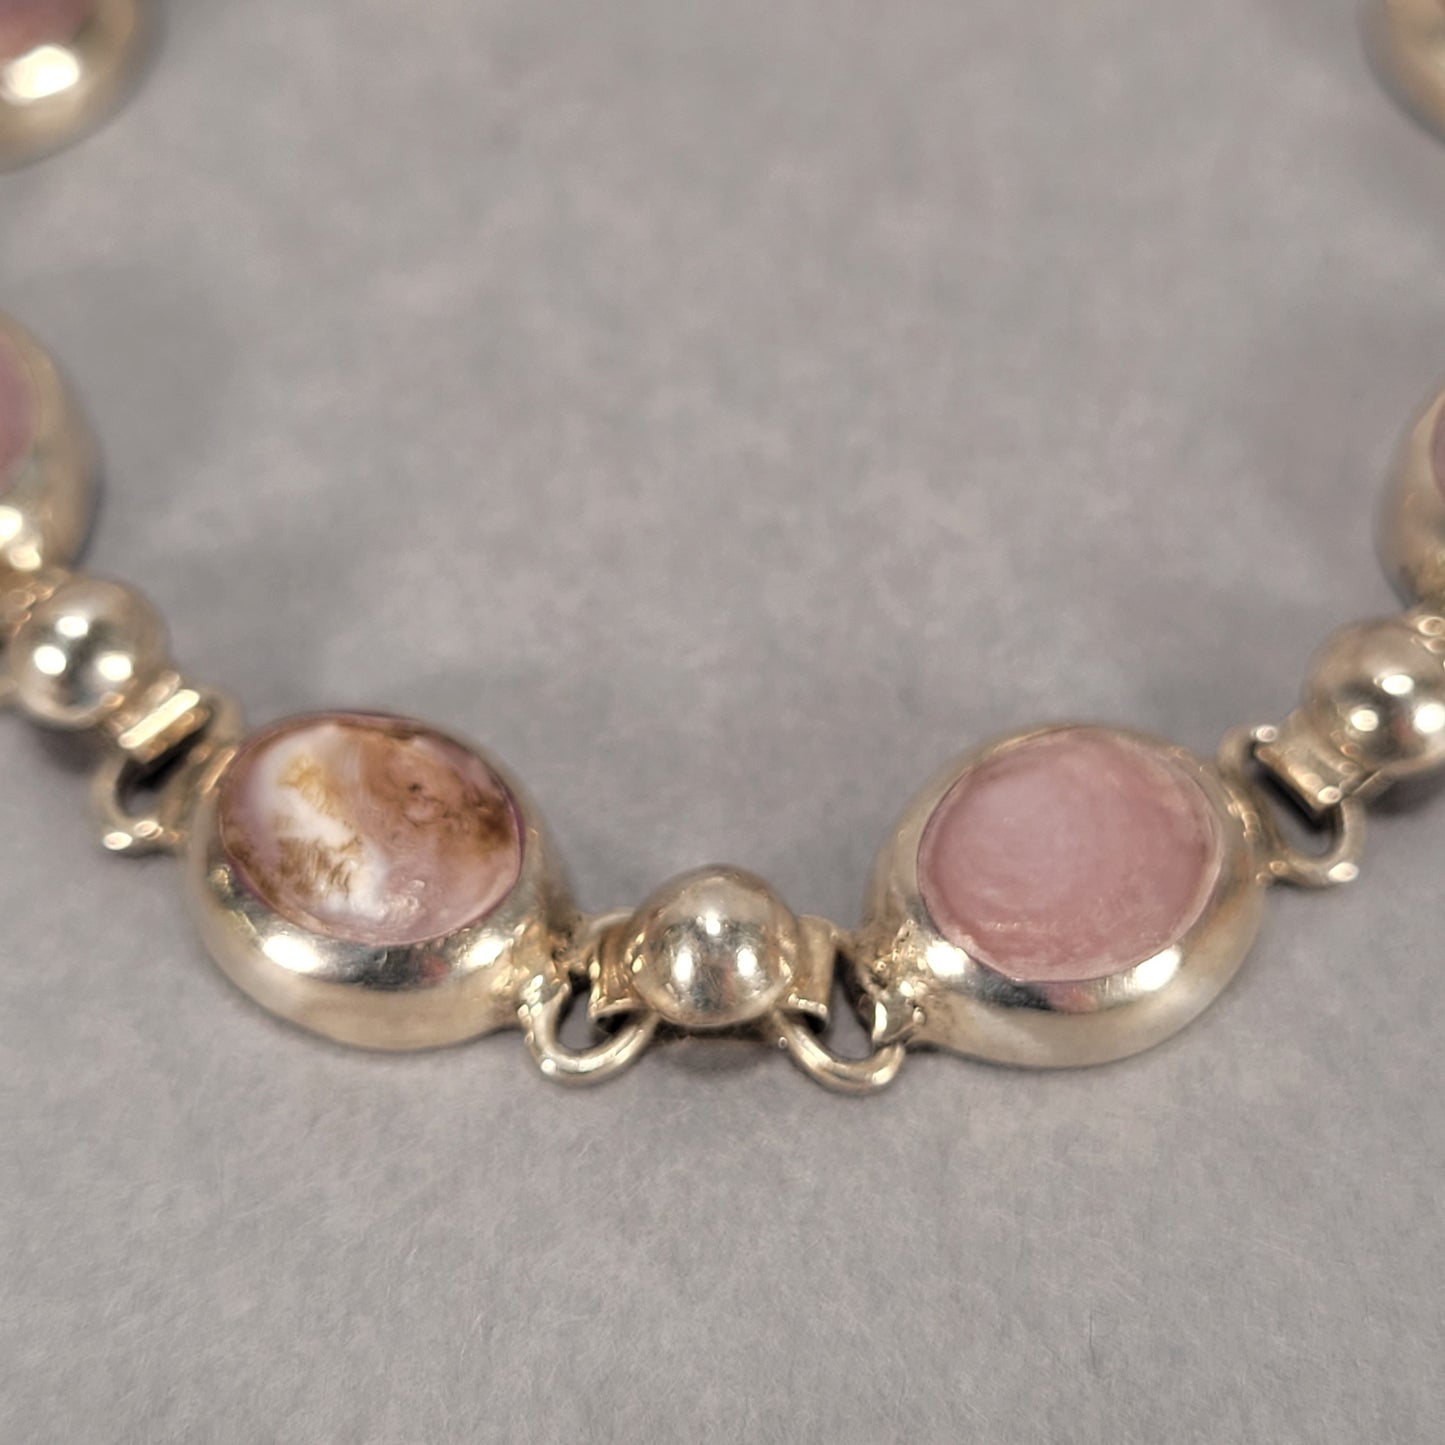 7" Sterling Silver Bracelet With Purple Stones 22.5g